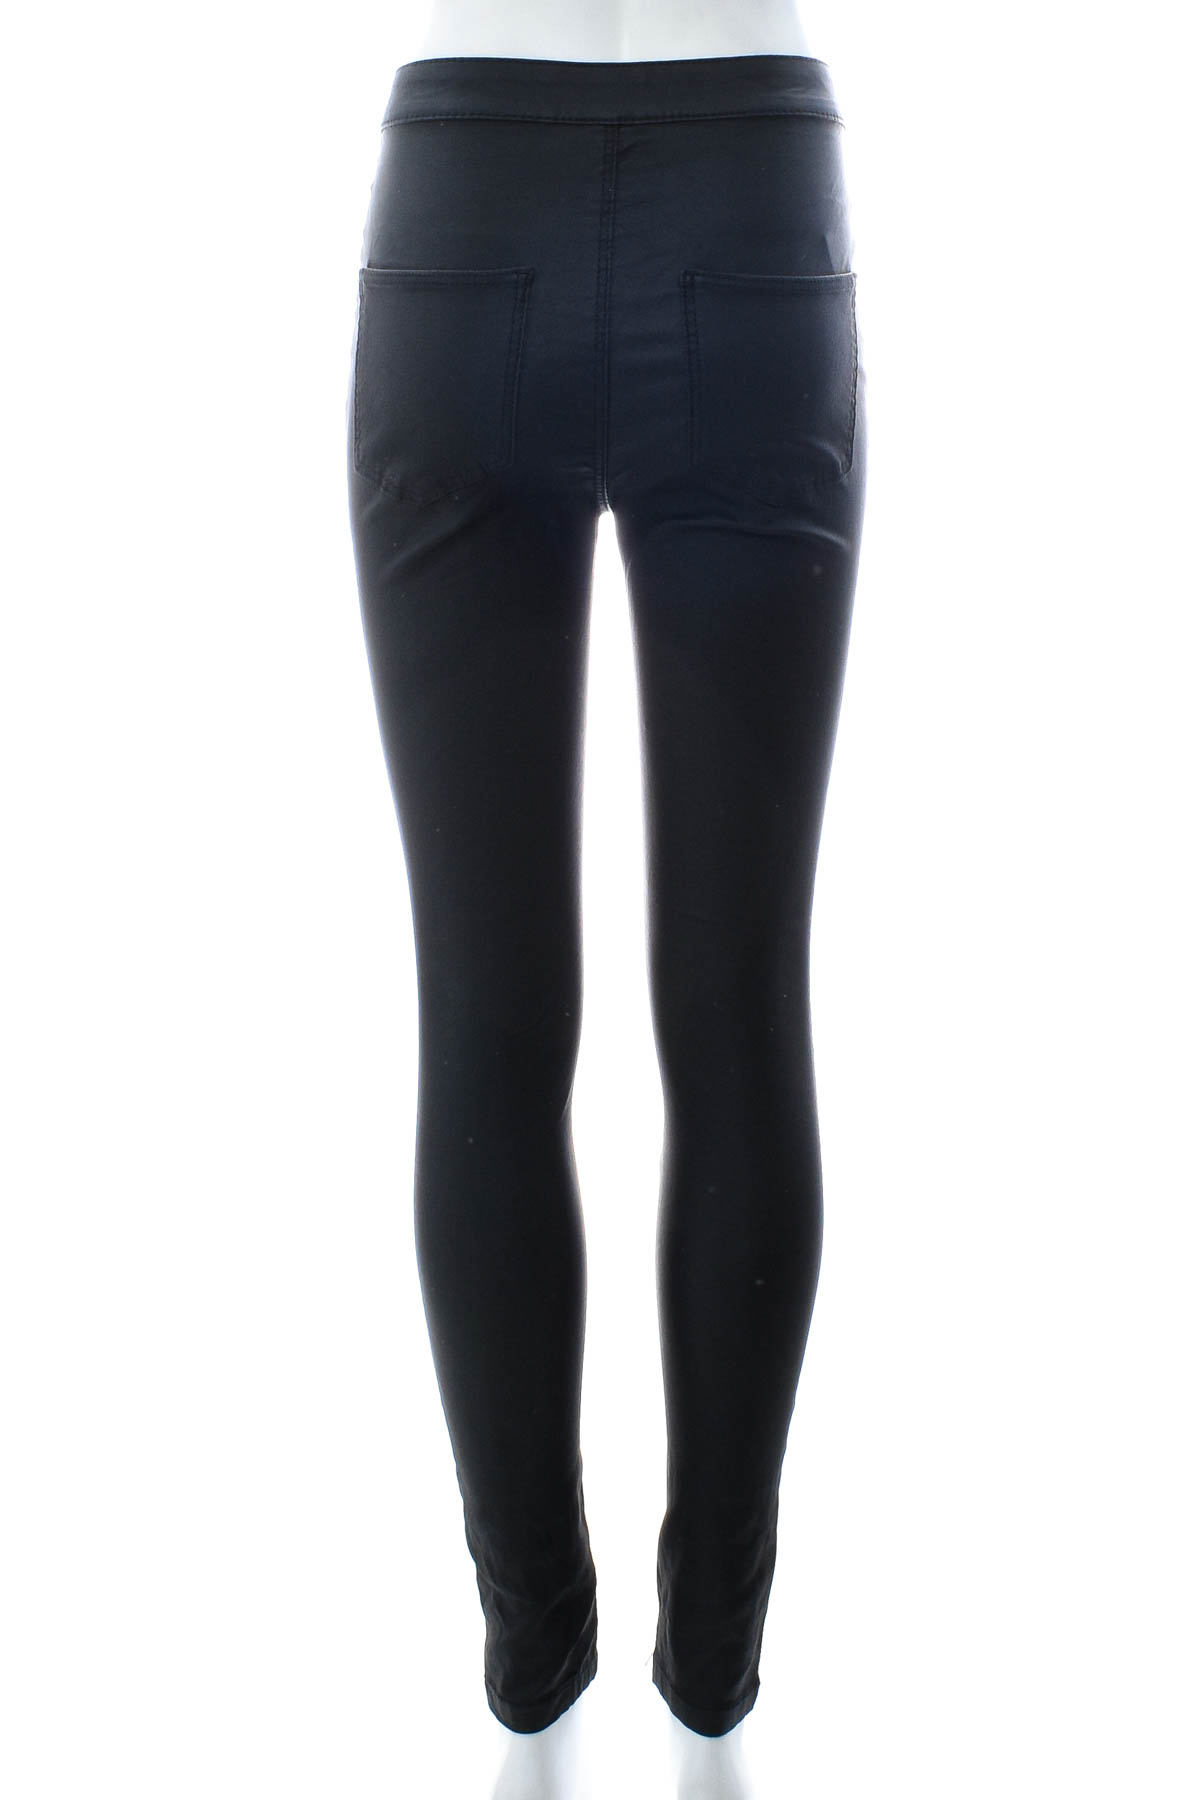 Women's leather trousers - NOISY MAY - 1